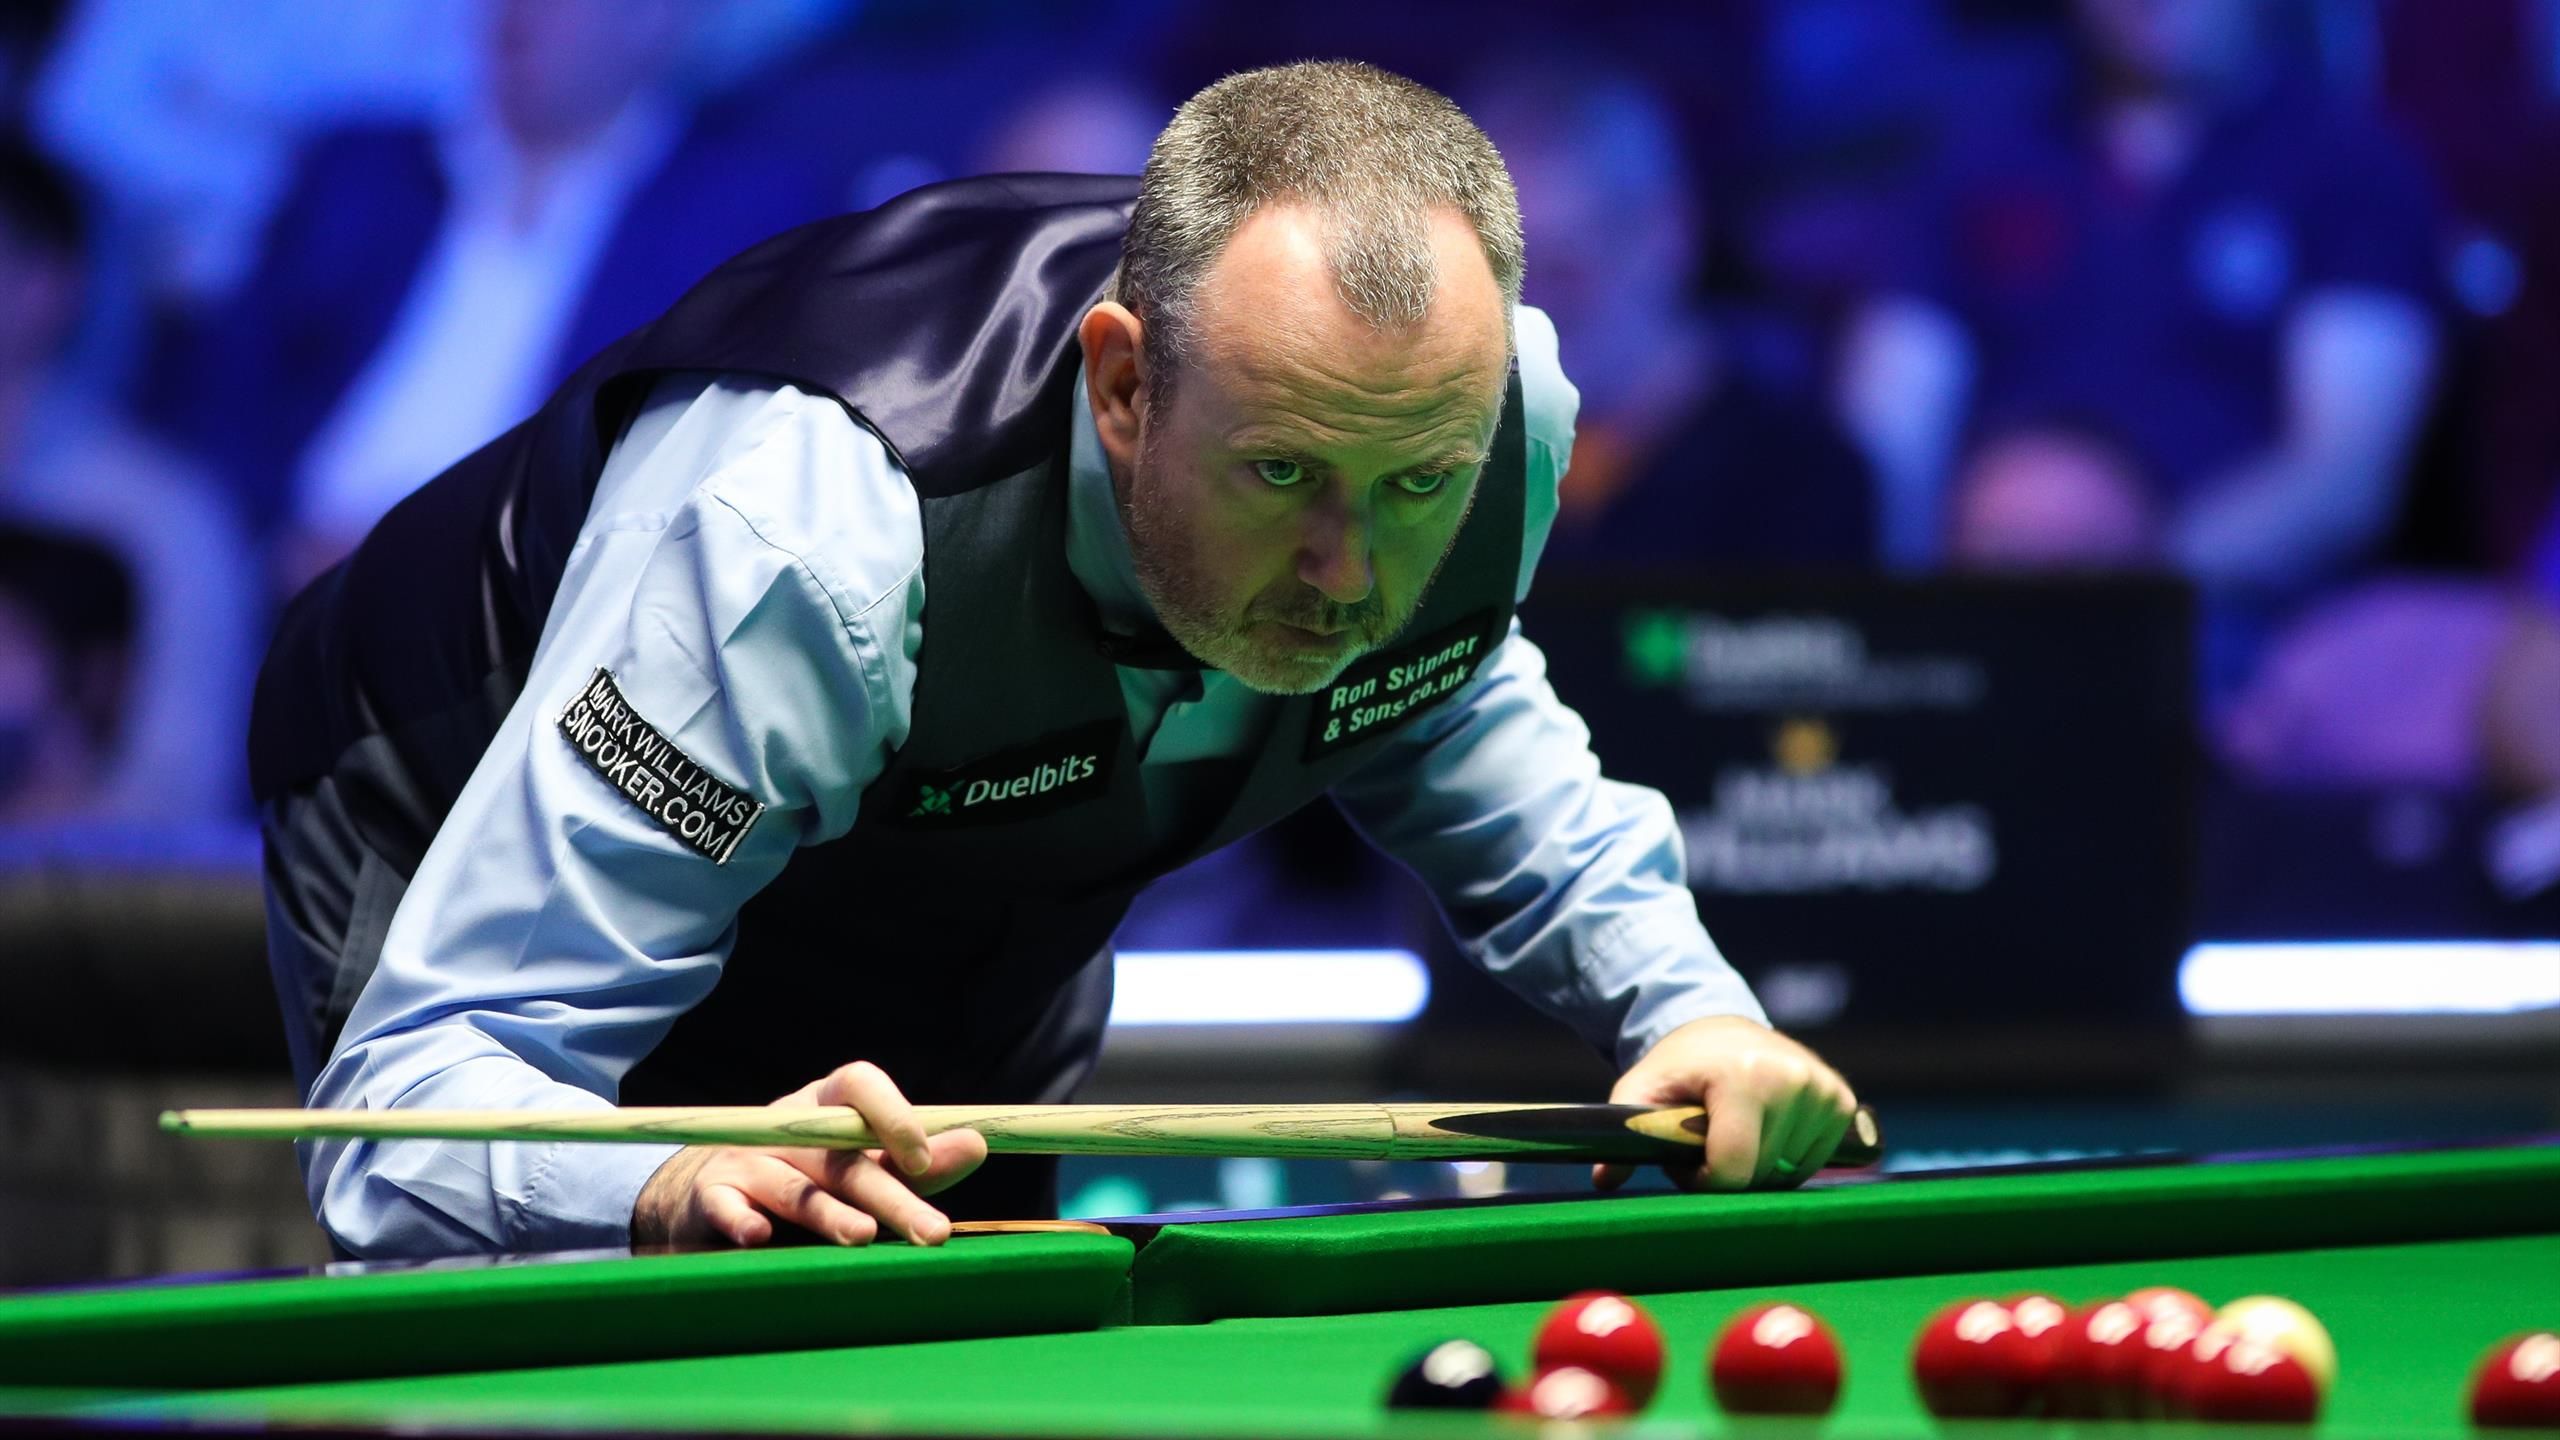 How to watch 2023 Snooker Shoot Out, draw, schedule and live stream with Mark Allen, Mark Williams playing